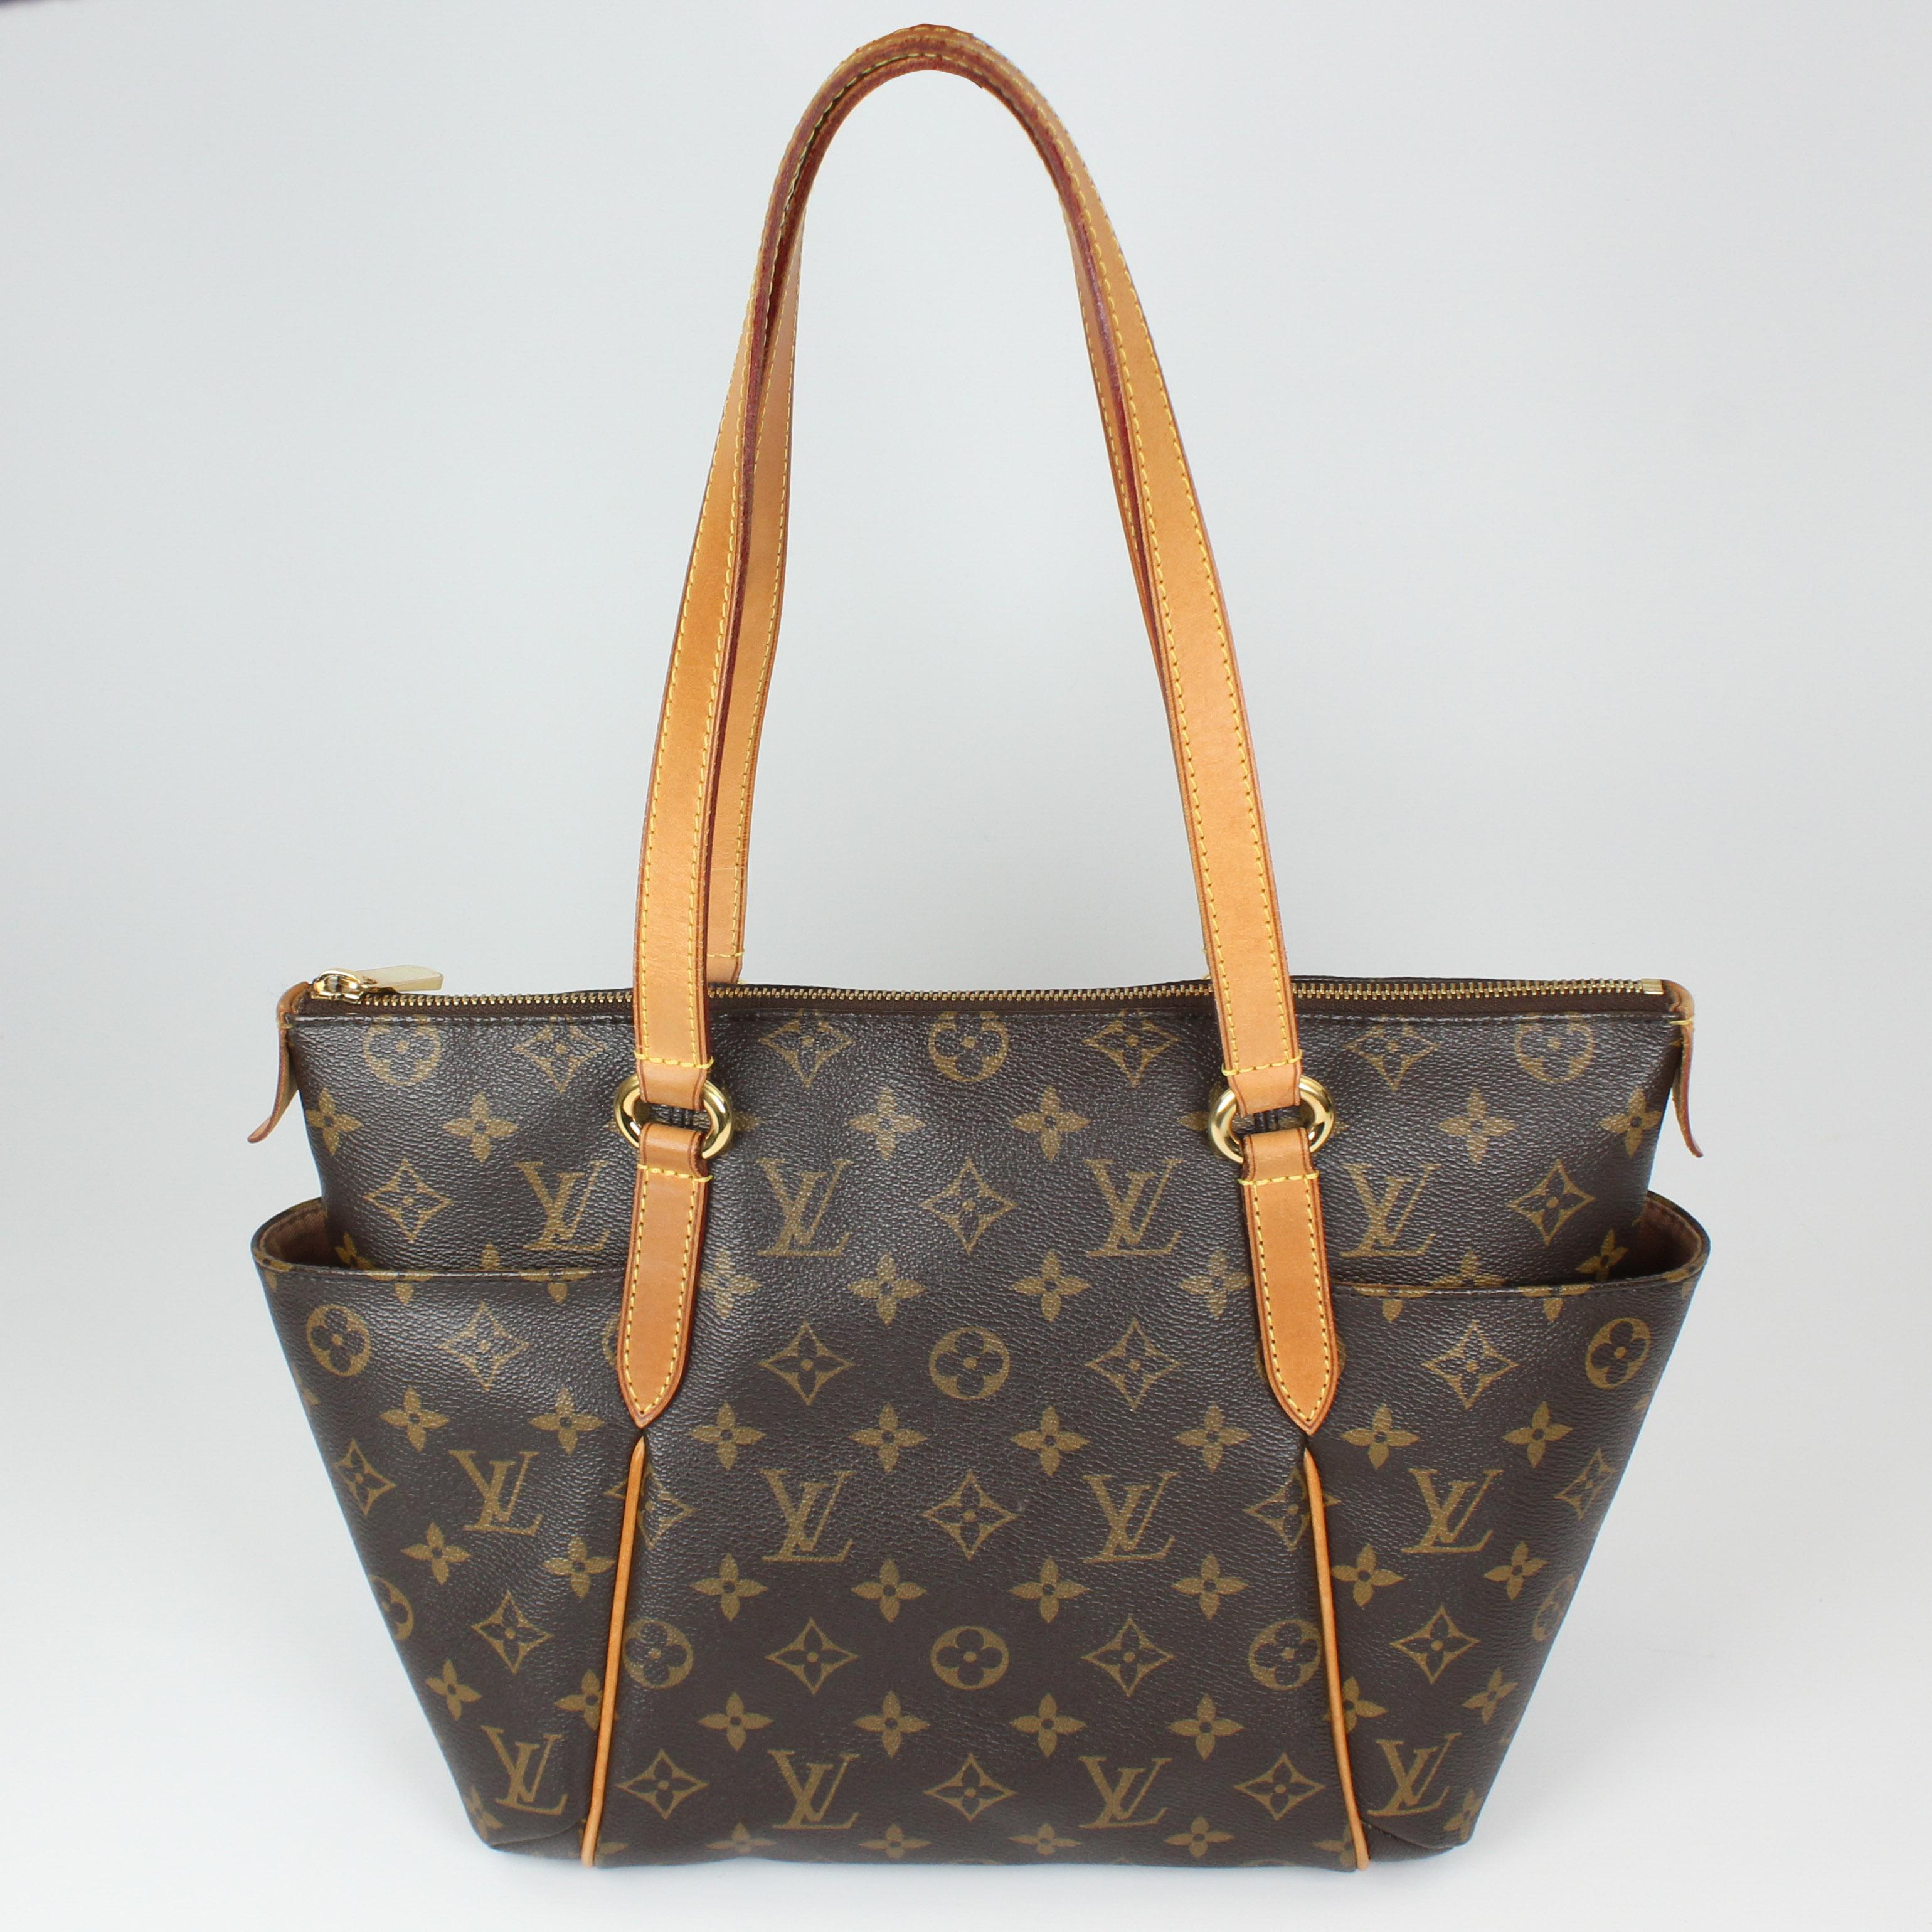 Louis Vuitton Totally Handbag in Leather In Good Condition For Sale In Rīga, LV